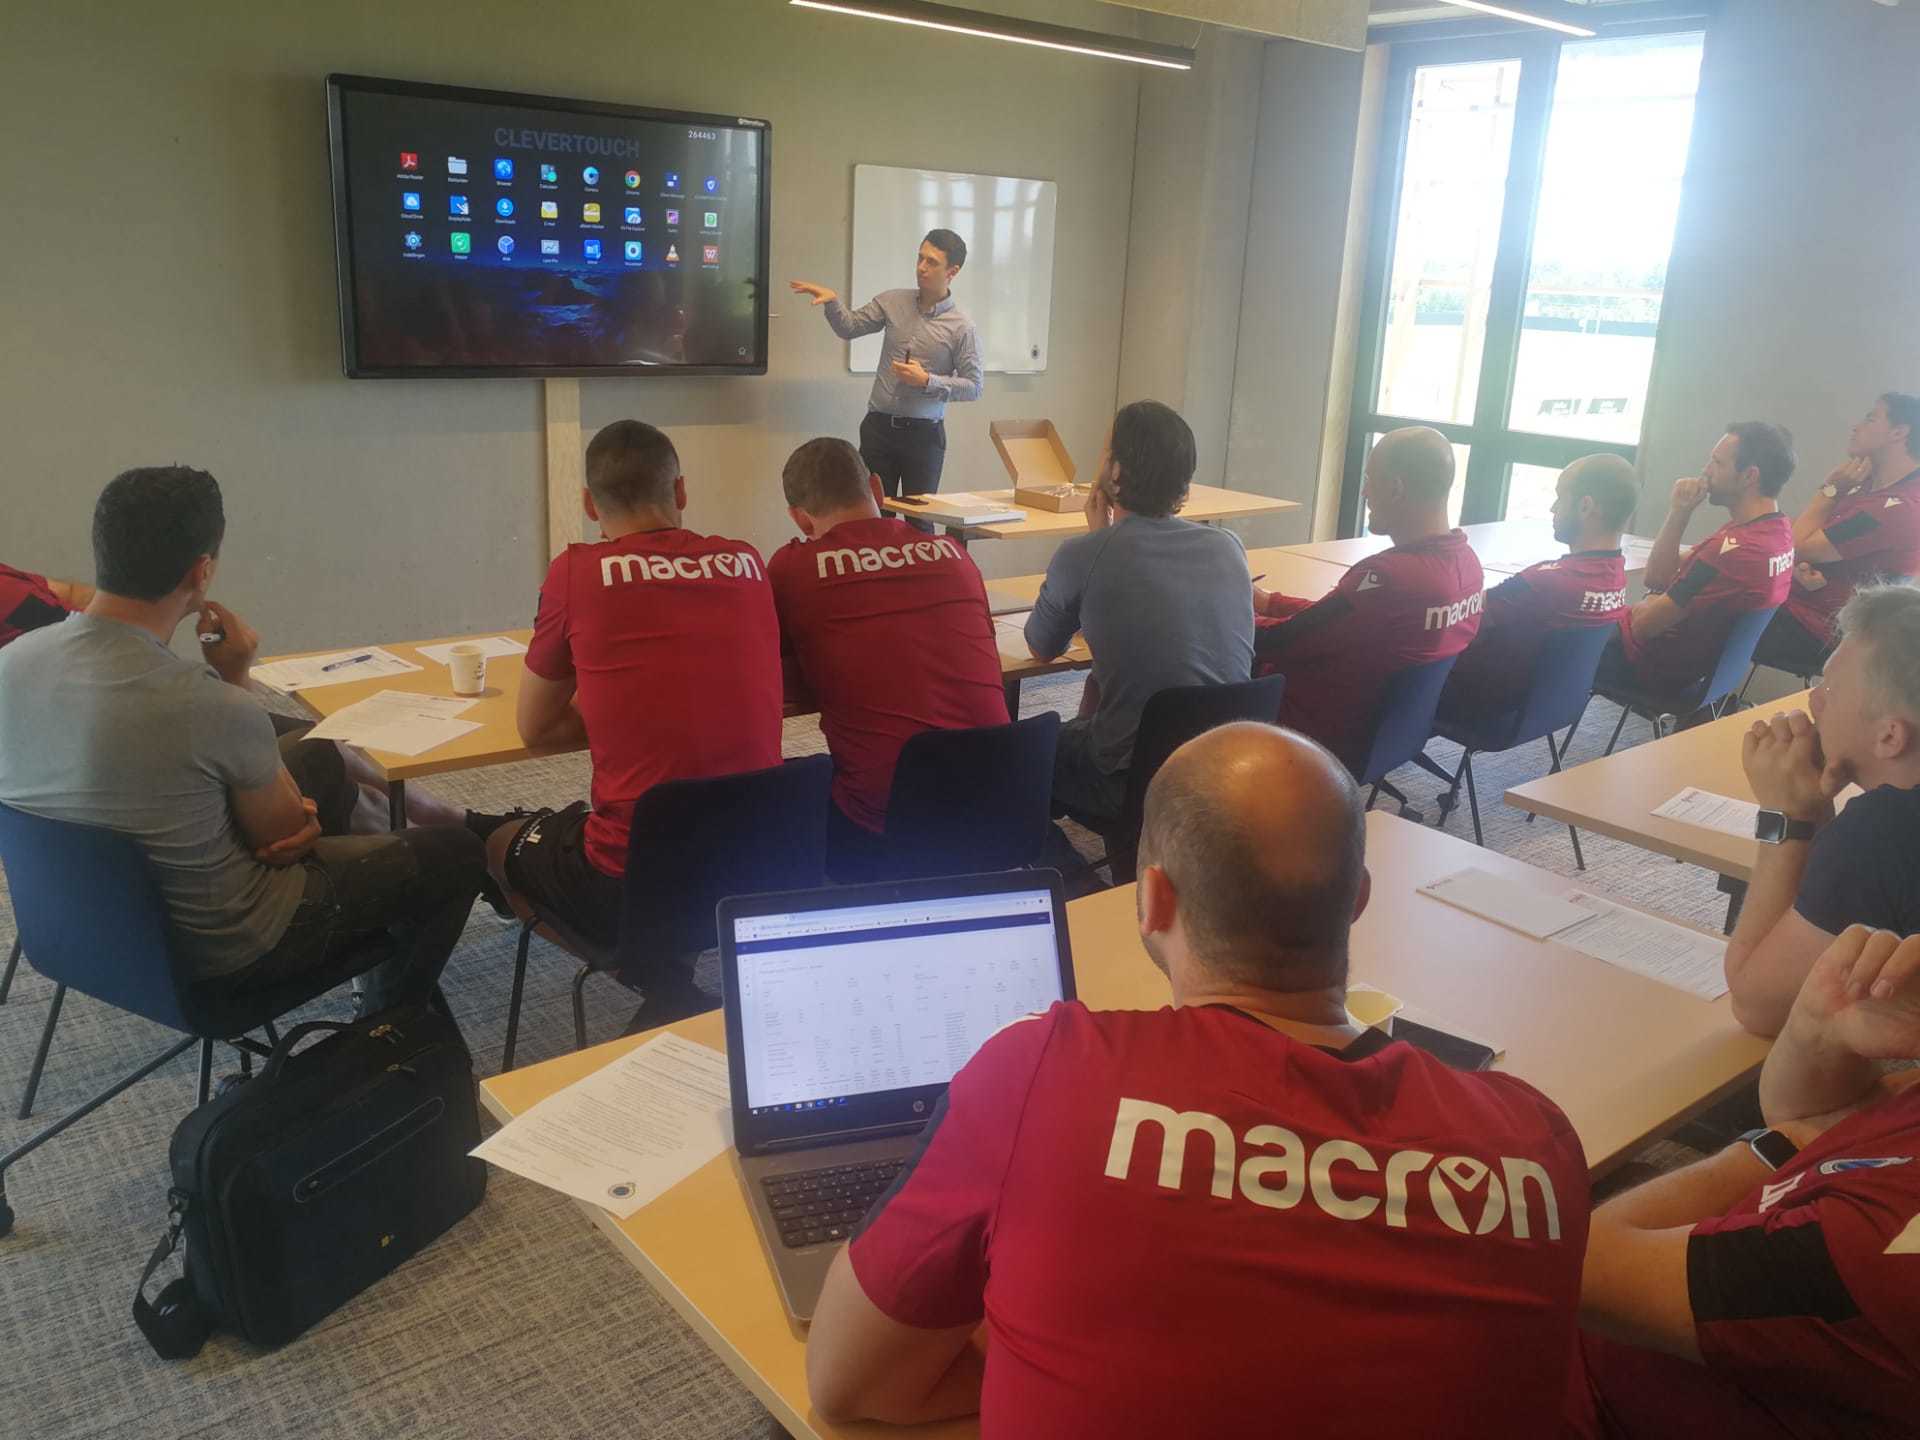 Club Brugge Marcelis Clevertouch smart office Opleiding touchscreens